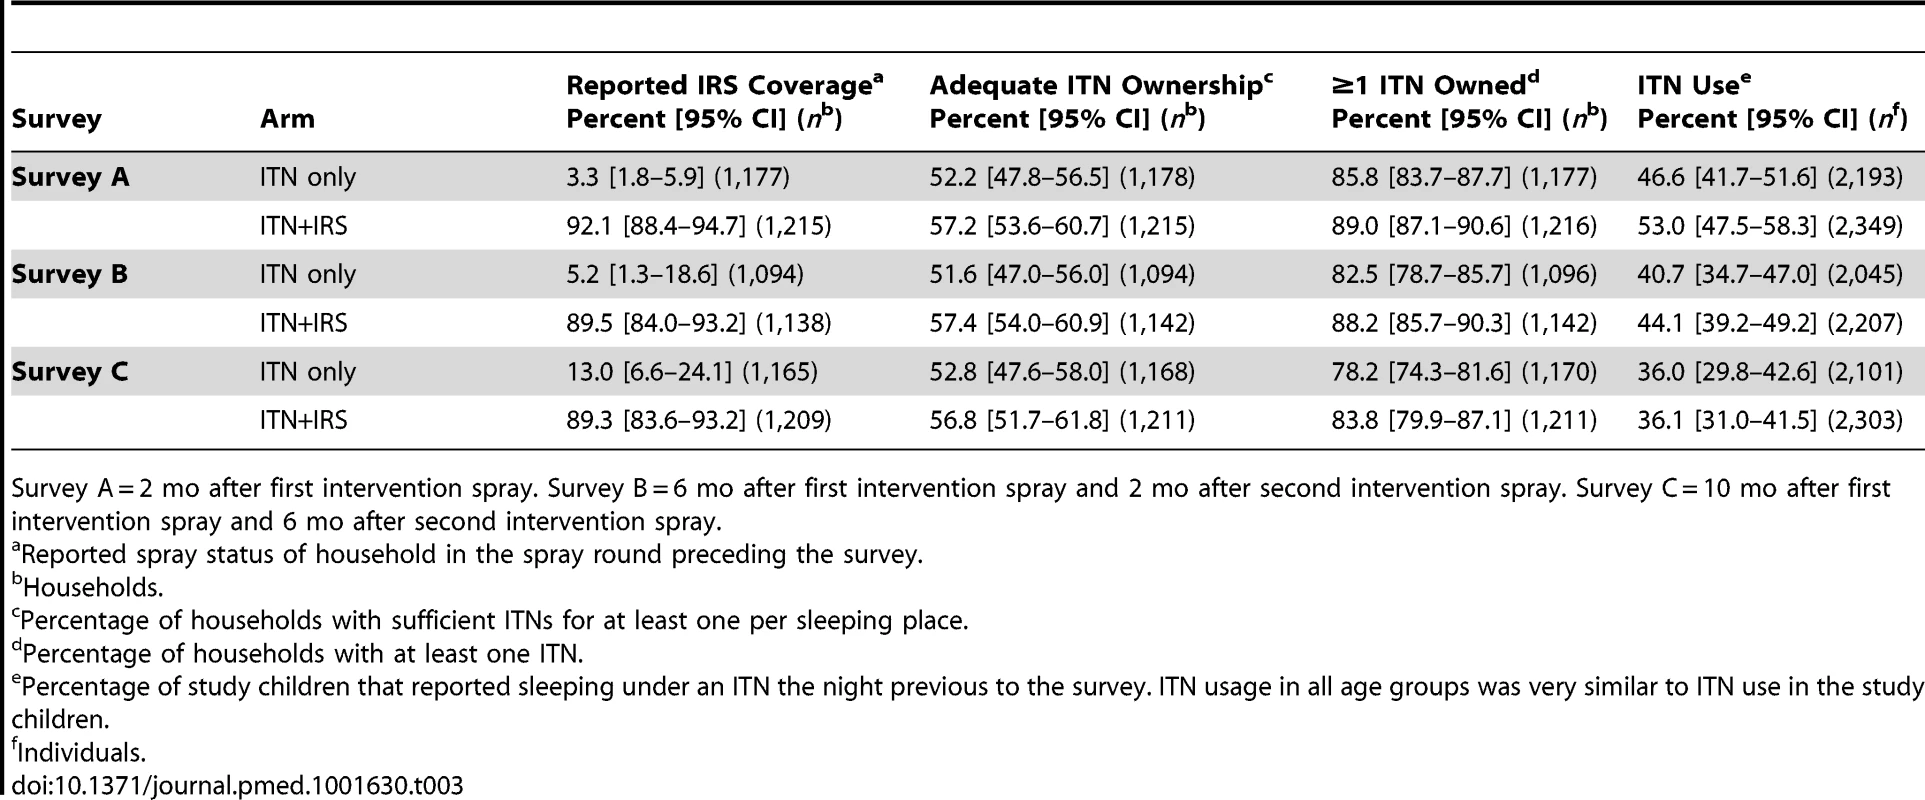 IRS coverage, ITN ownership, and ITN usage in the intervention year, Muleba District, 2012.